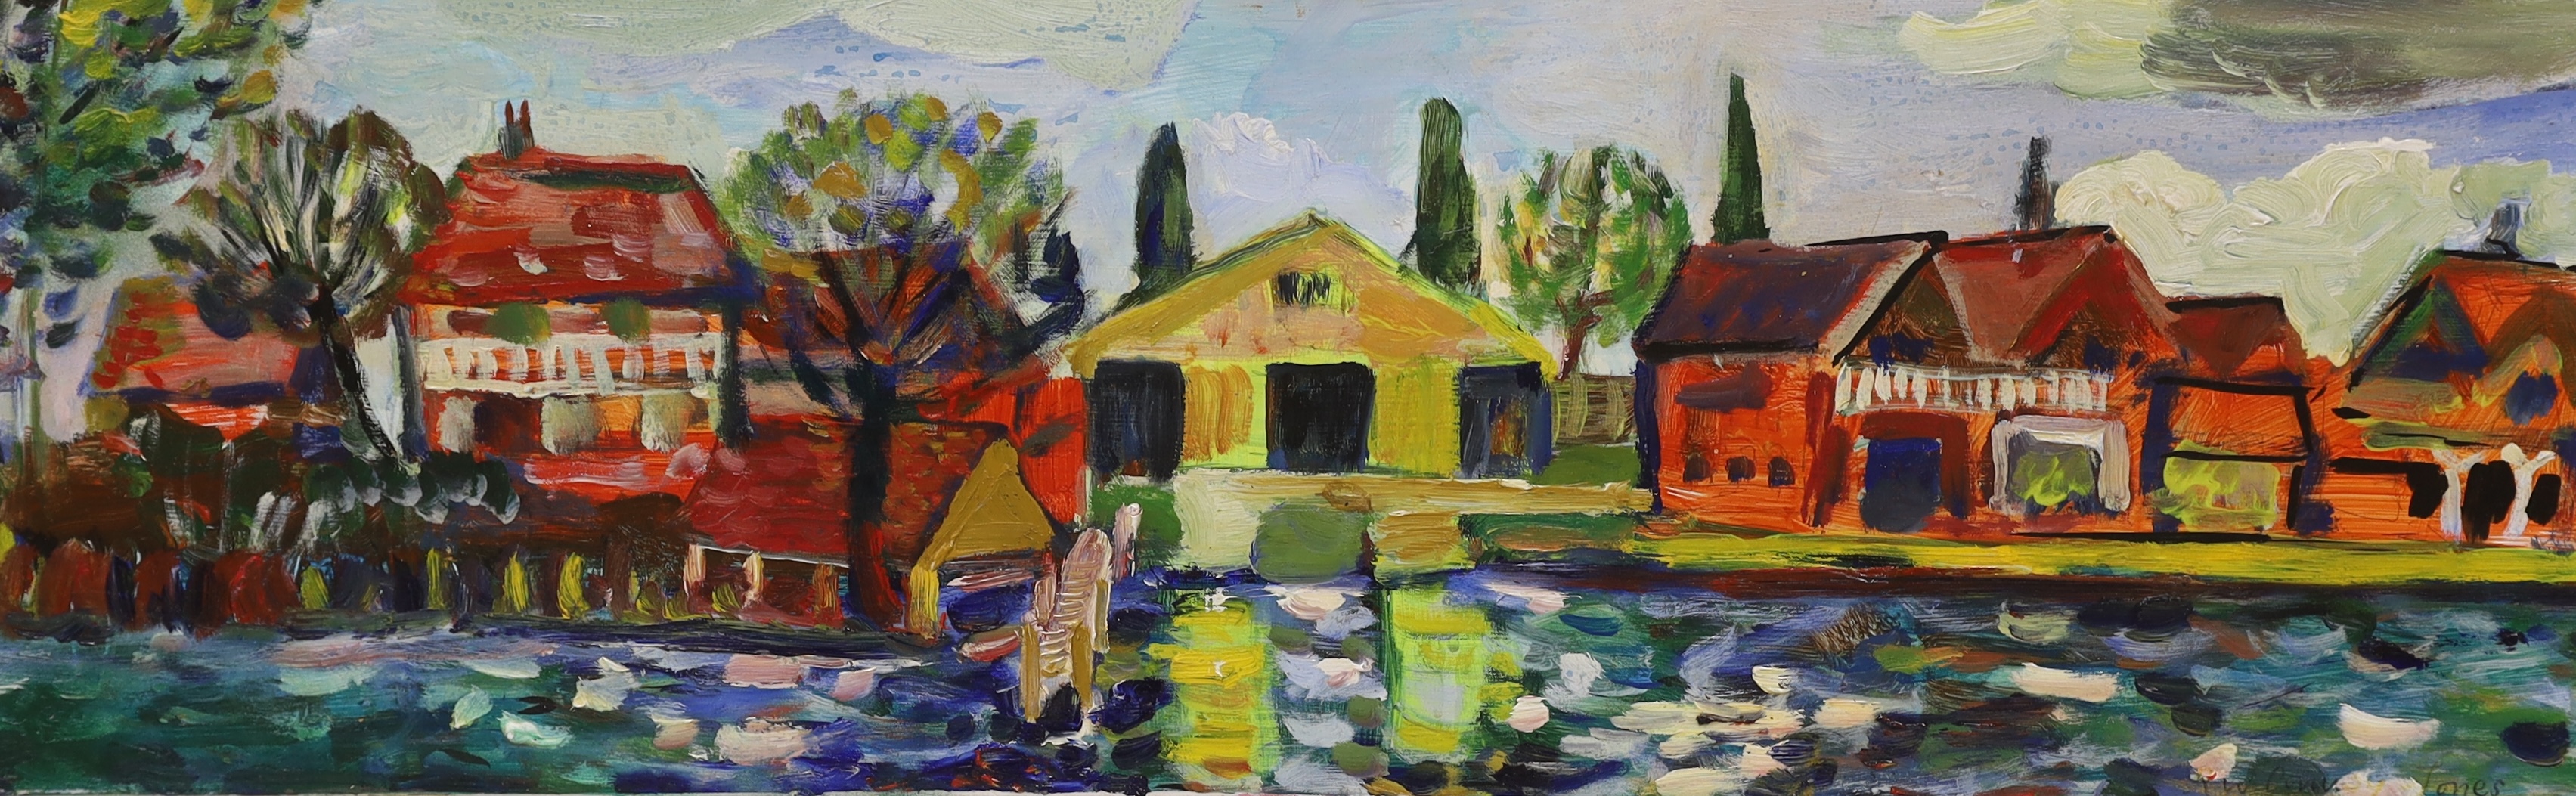 Richard William Conway Jones (Contemporary), oil on canvas, 'Hobbs old boathouse on the Thames, inscribed and stamped verso, 30 x 96cm. Condition - good, some surface dirt